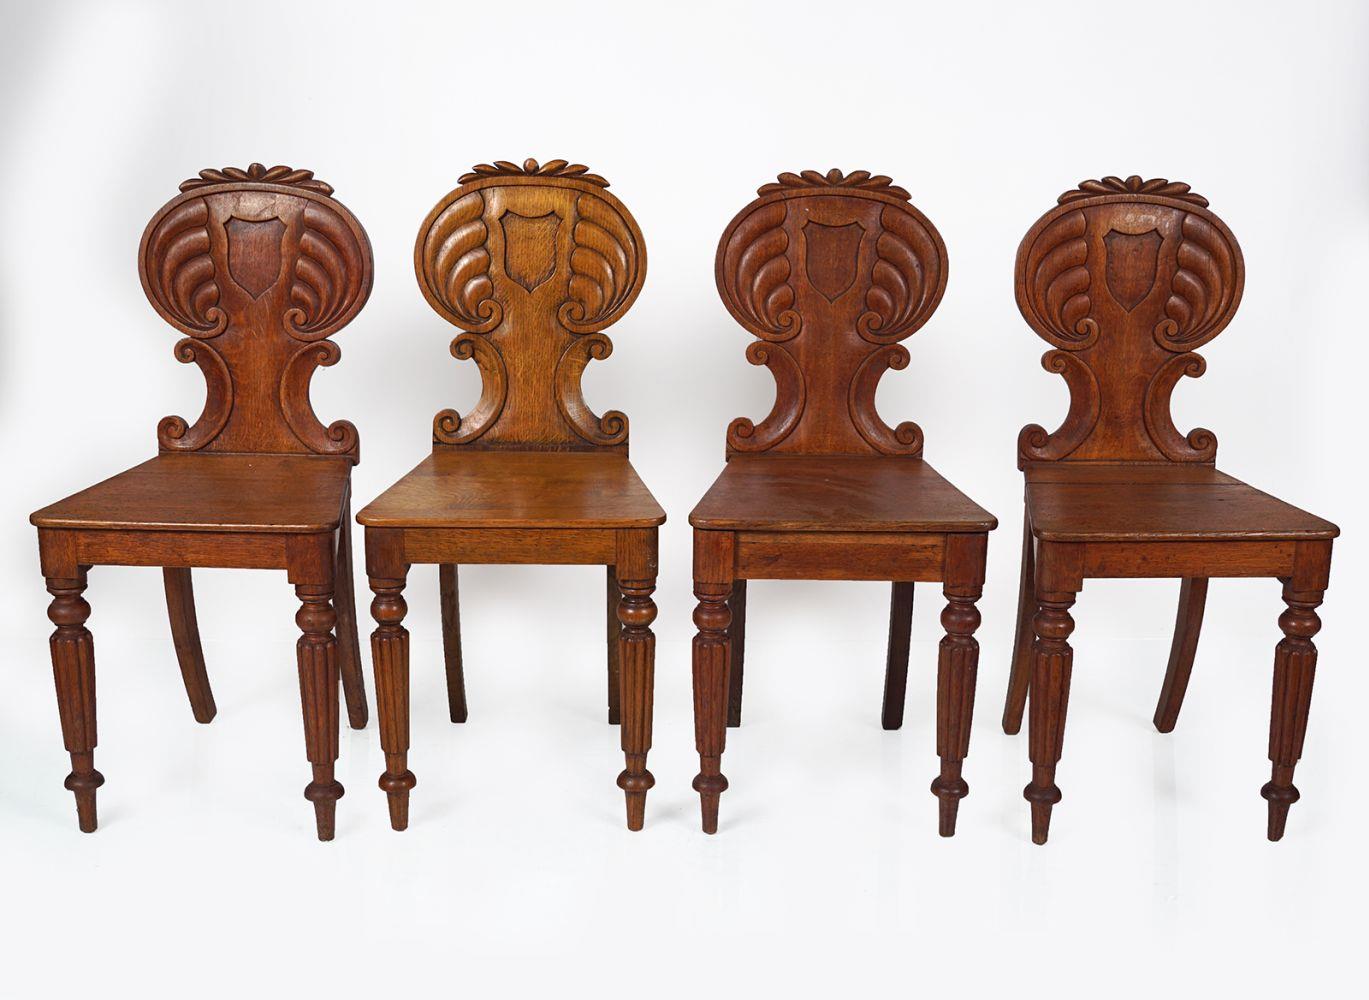 SUITE OF 4 WILLIAM IV OAK HALL CHAIRS